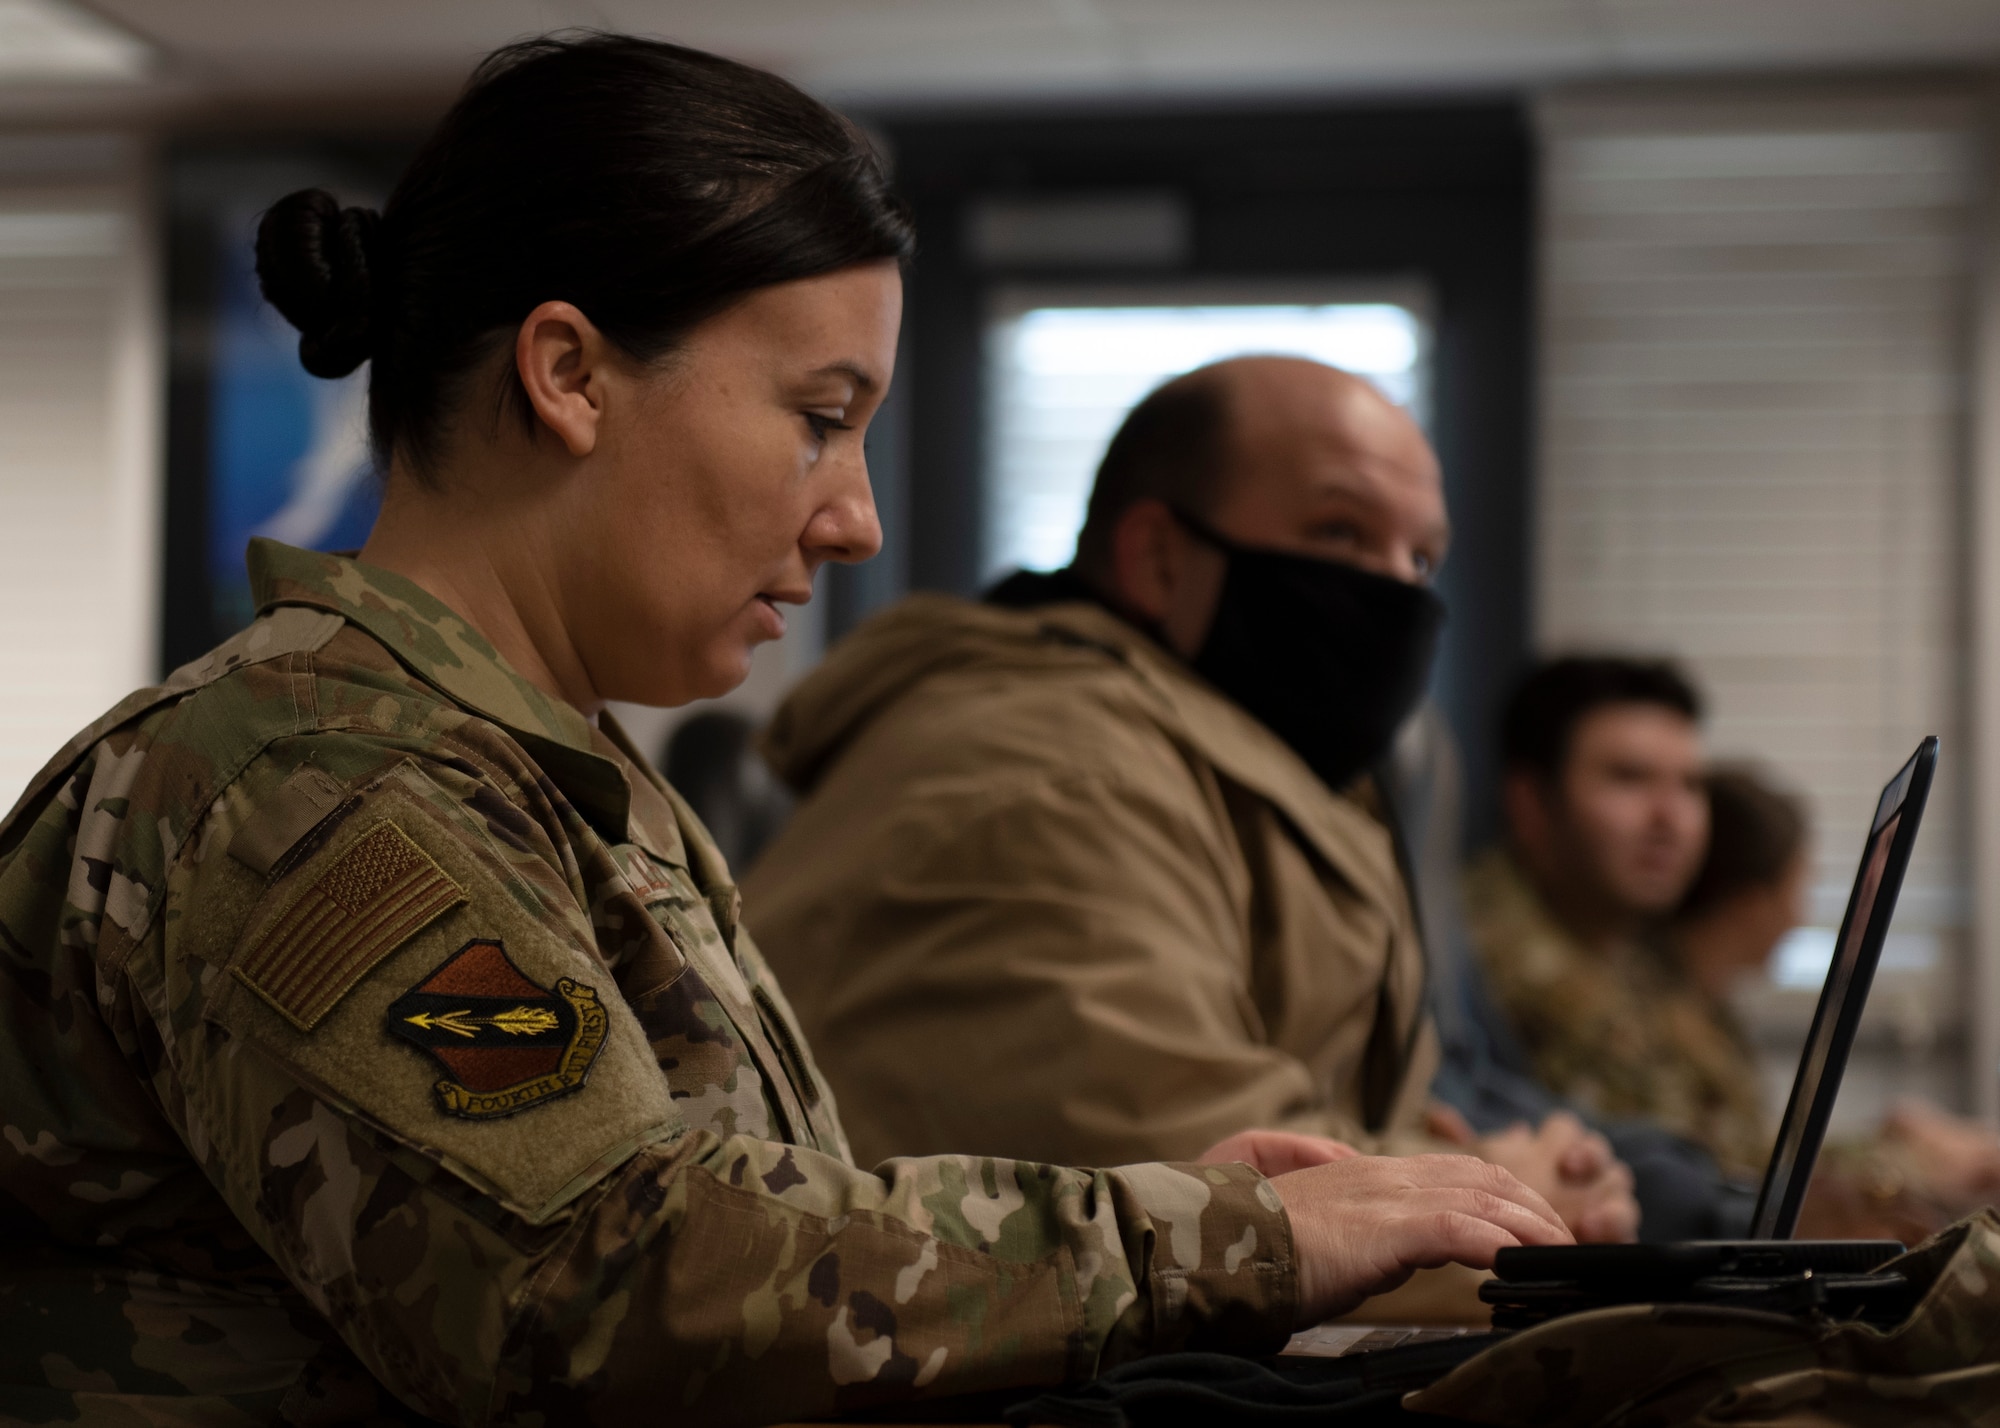 Master Sgt. Stephanie Miller, 4th Fighter Wing law office superintendent, attends an Excel class at Seymour Johnson Air Force Base, North Carolina, Nov. 2, 2020.